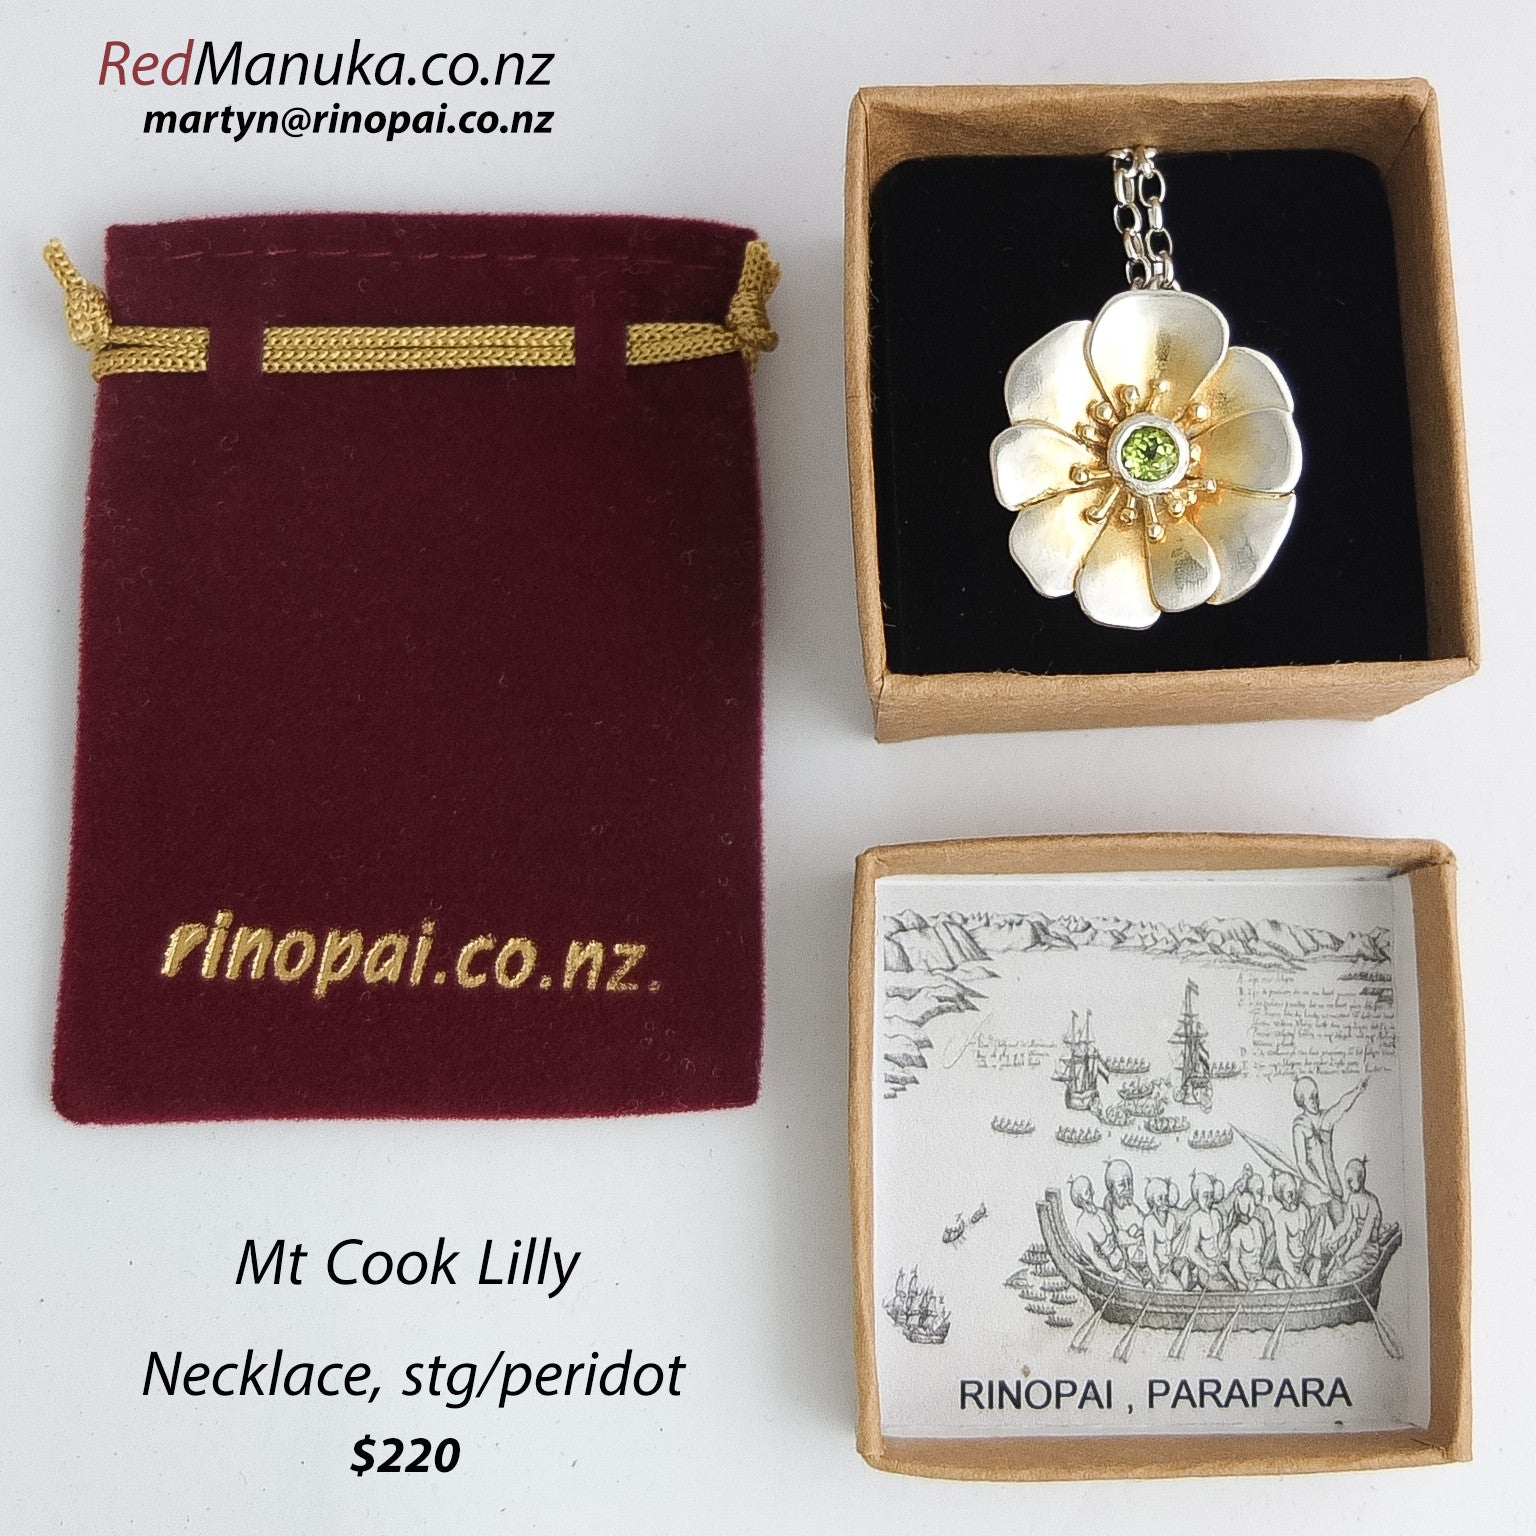 Mt Cook Lilly Silver and Gold necklace and Gift box by nz jeweller Martyn Milligan. Rinopai, Golden Bay, Nelson